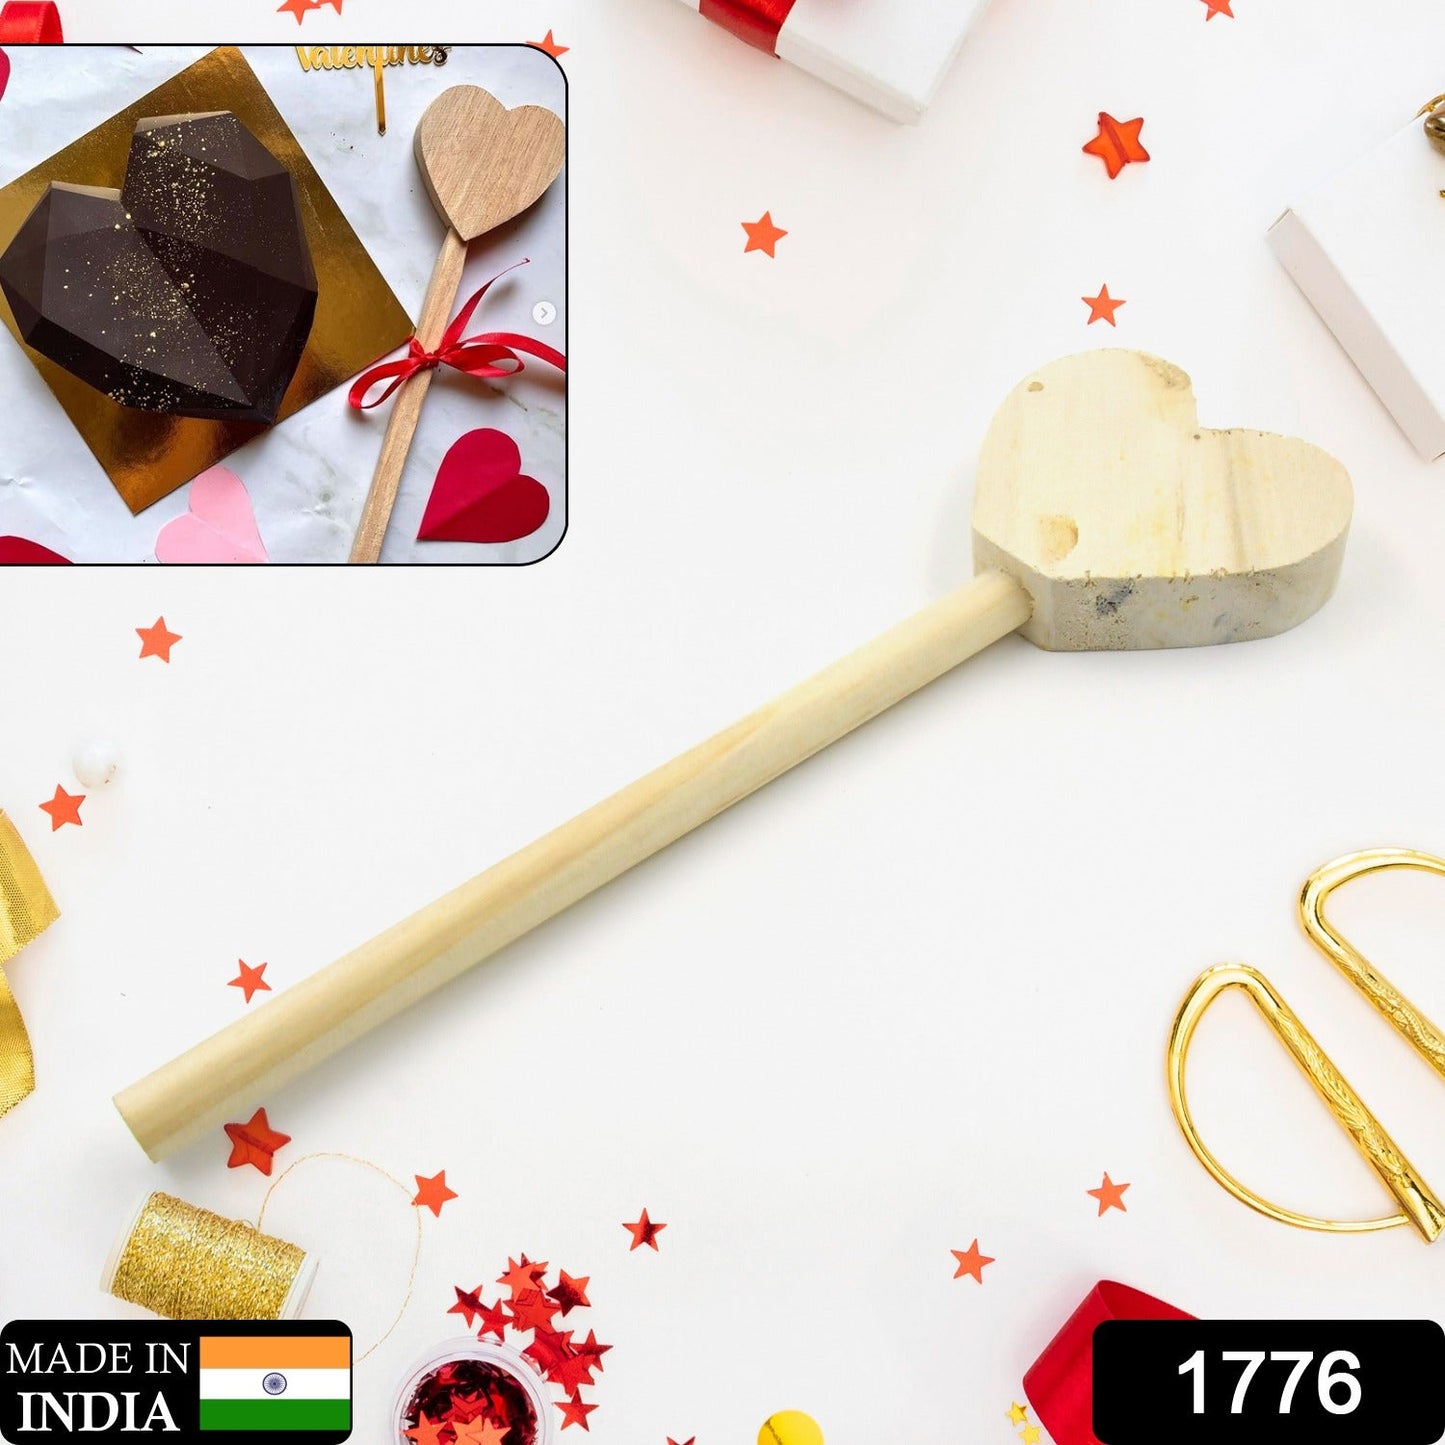 1776 Special Heart Shape Wooden Hammer for Pinata Cake, Pinata 10 inch Wooden Hammer for Pinata Cake (1 Pc)